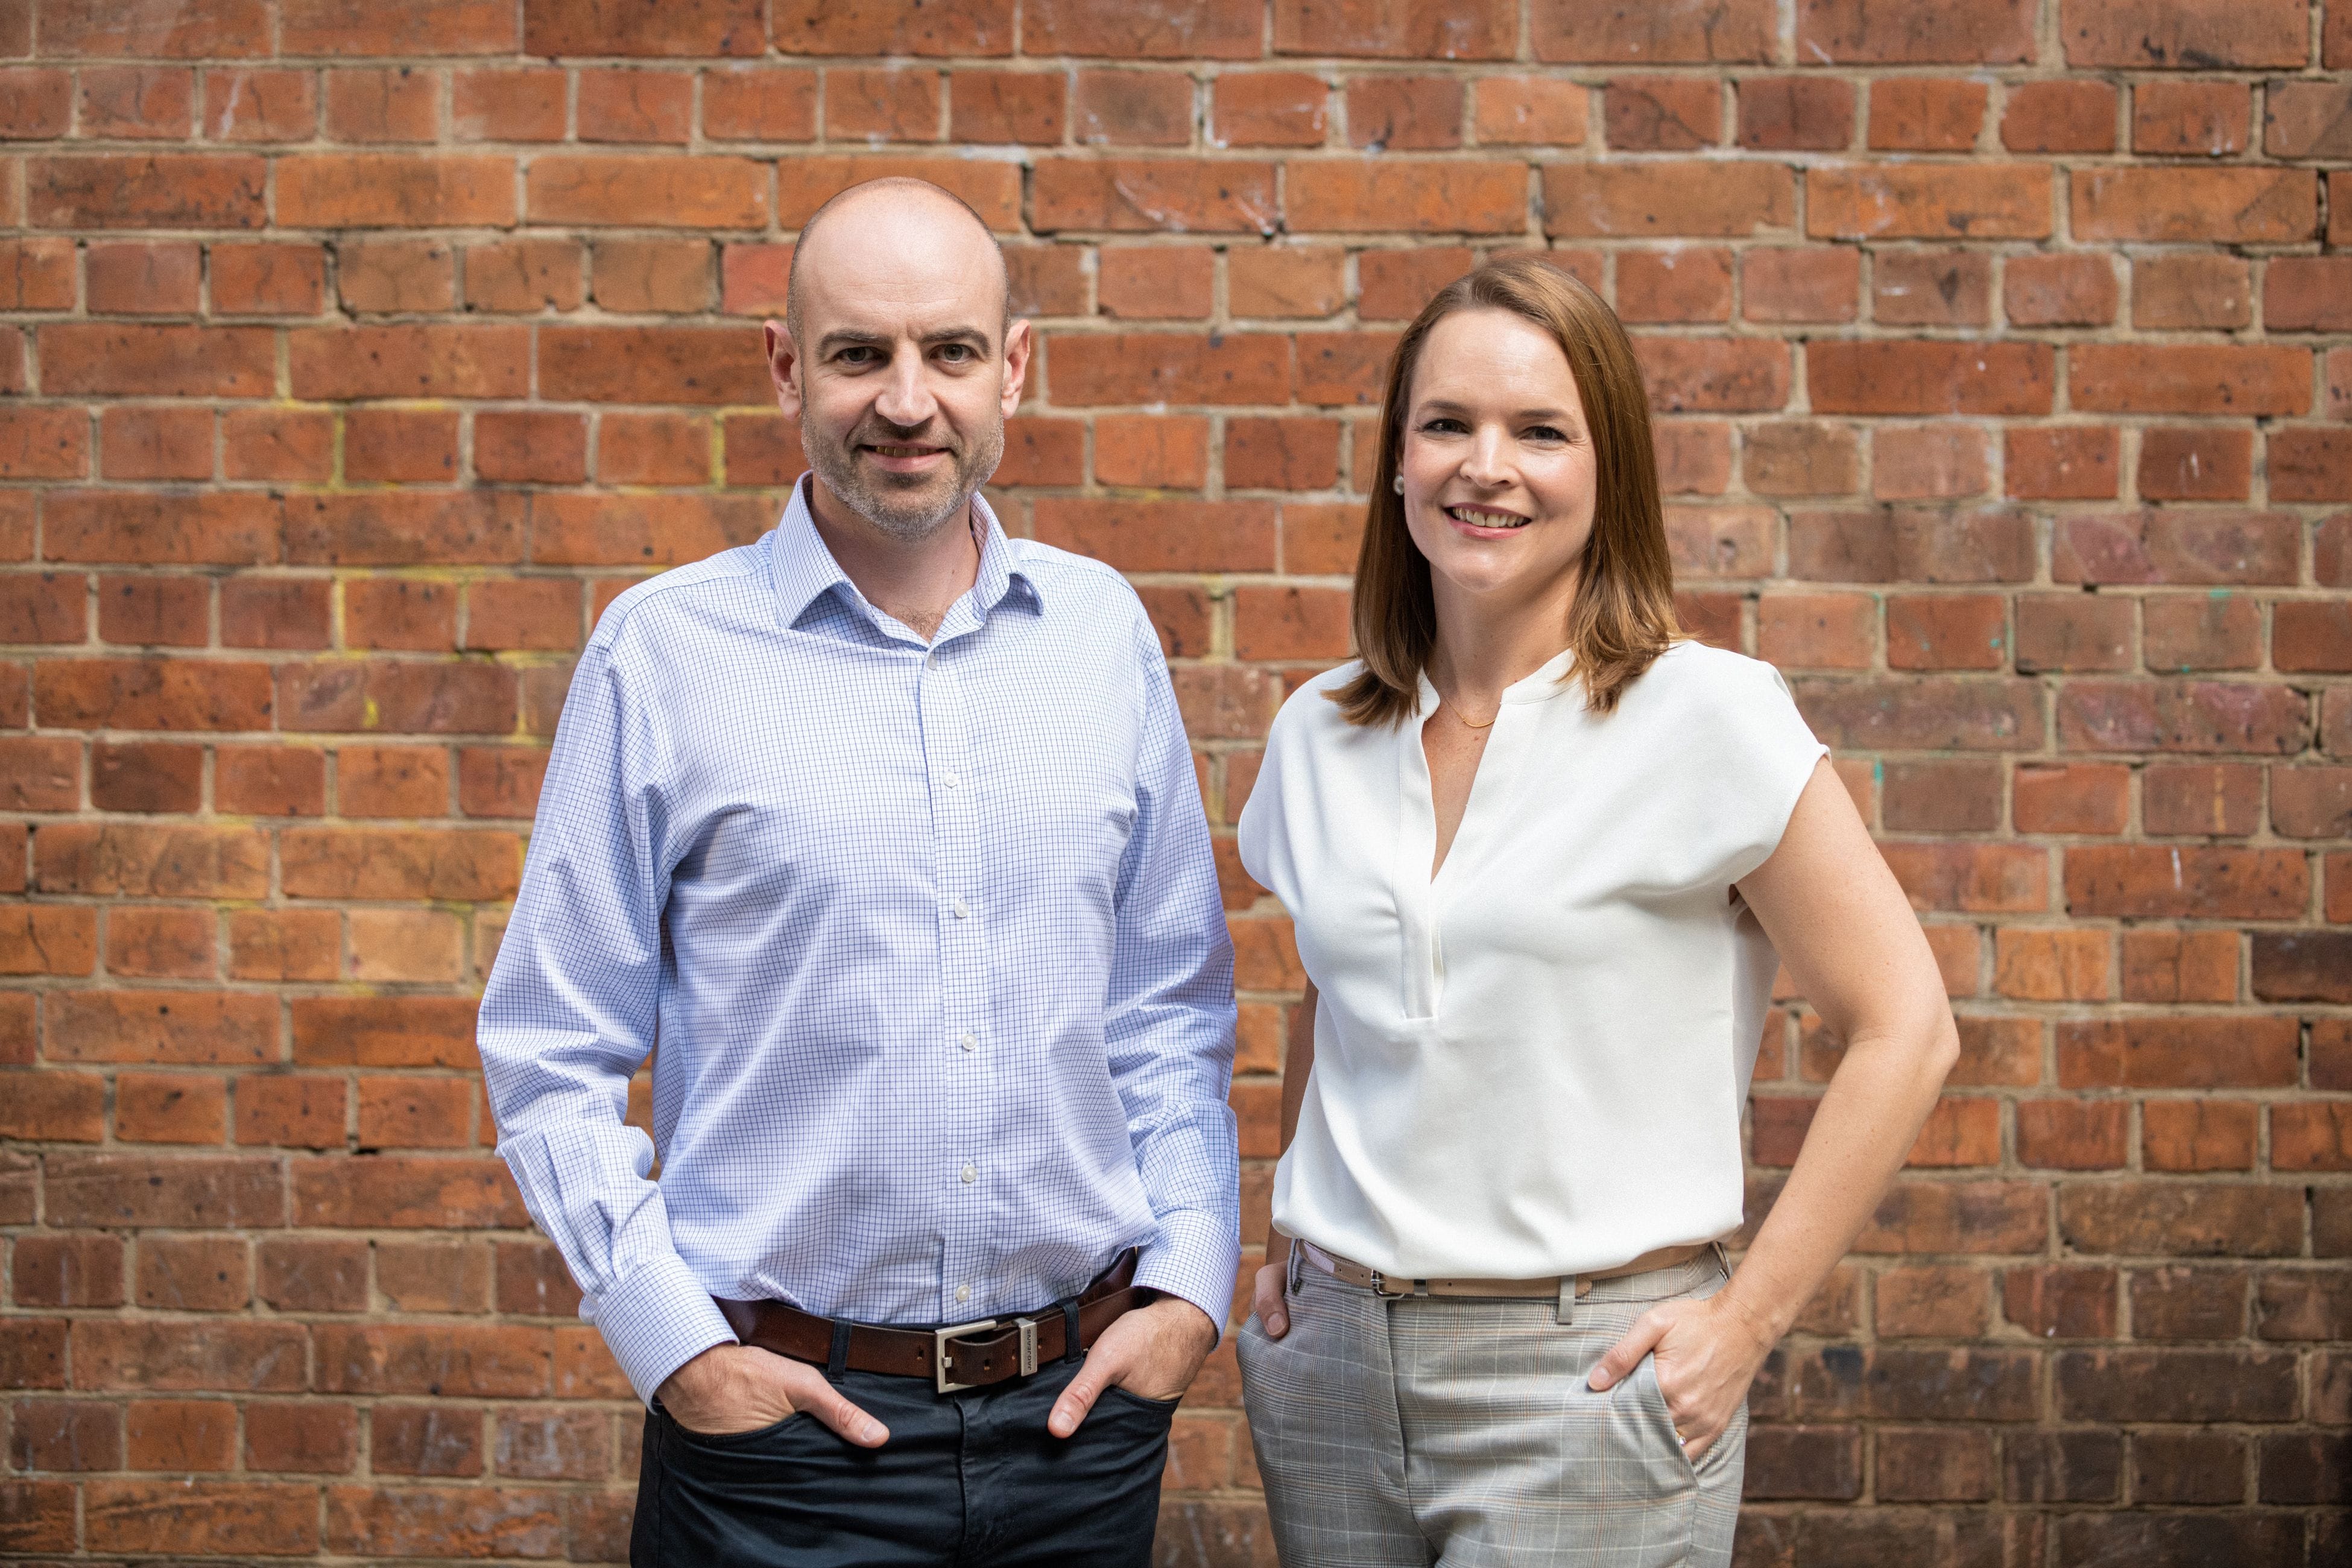 Legal tech group Lawcadia expands into UK after another strong year of growth